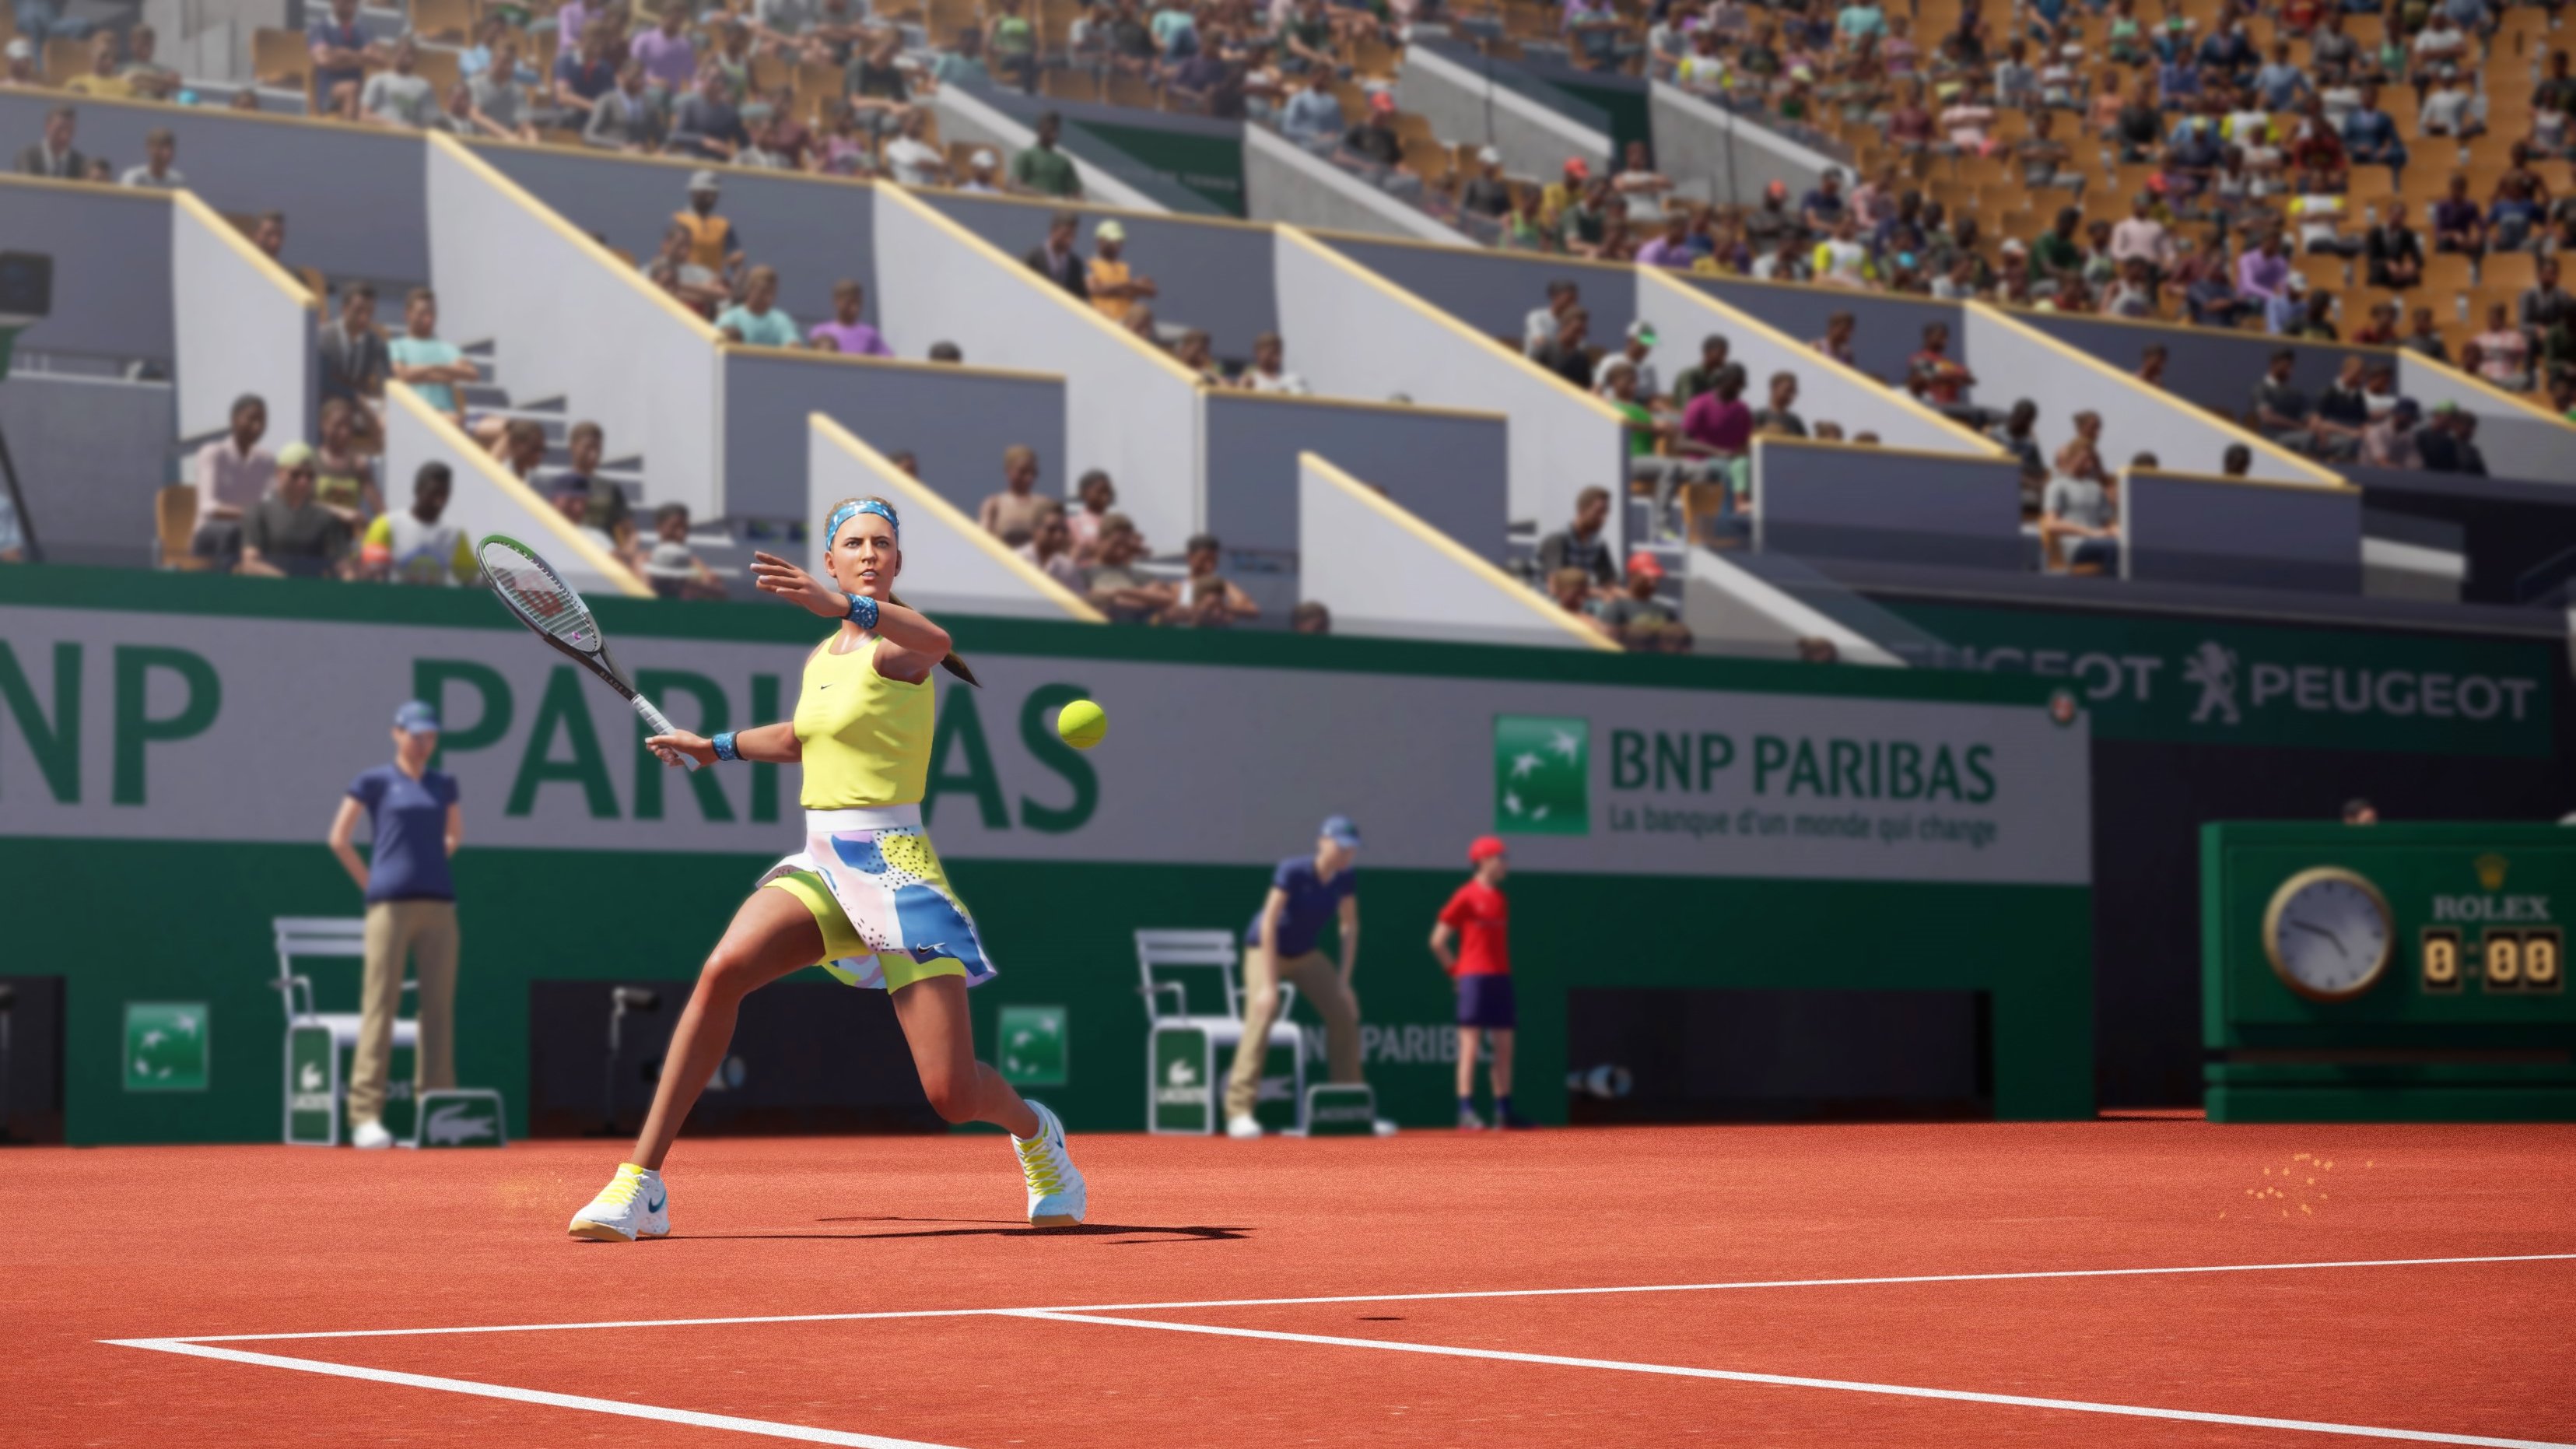 Tennis World Tour 2 Dev Returns to the Court with Tiebreak for PS5, PS4